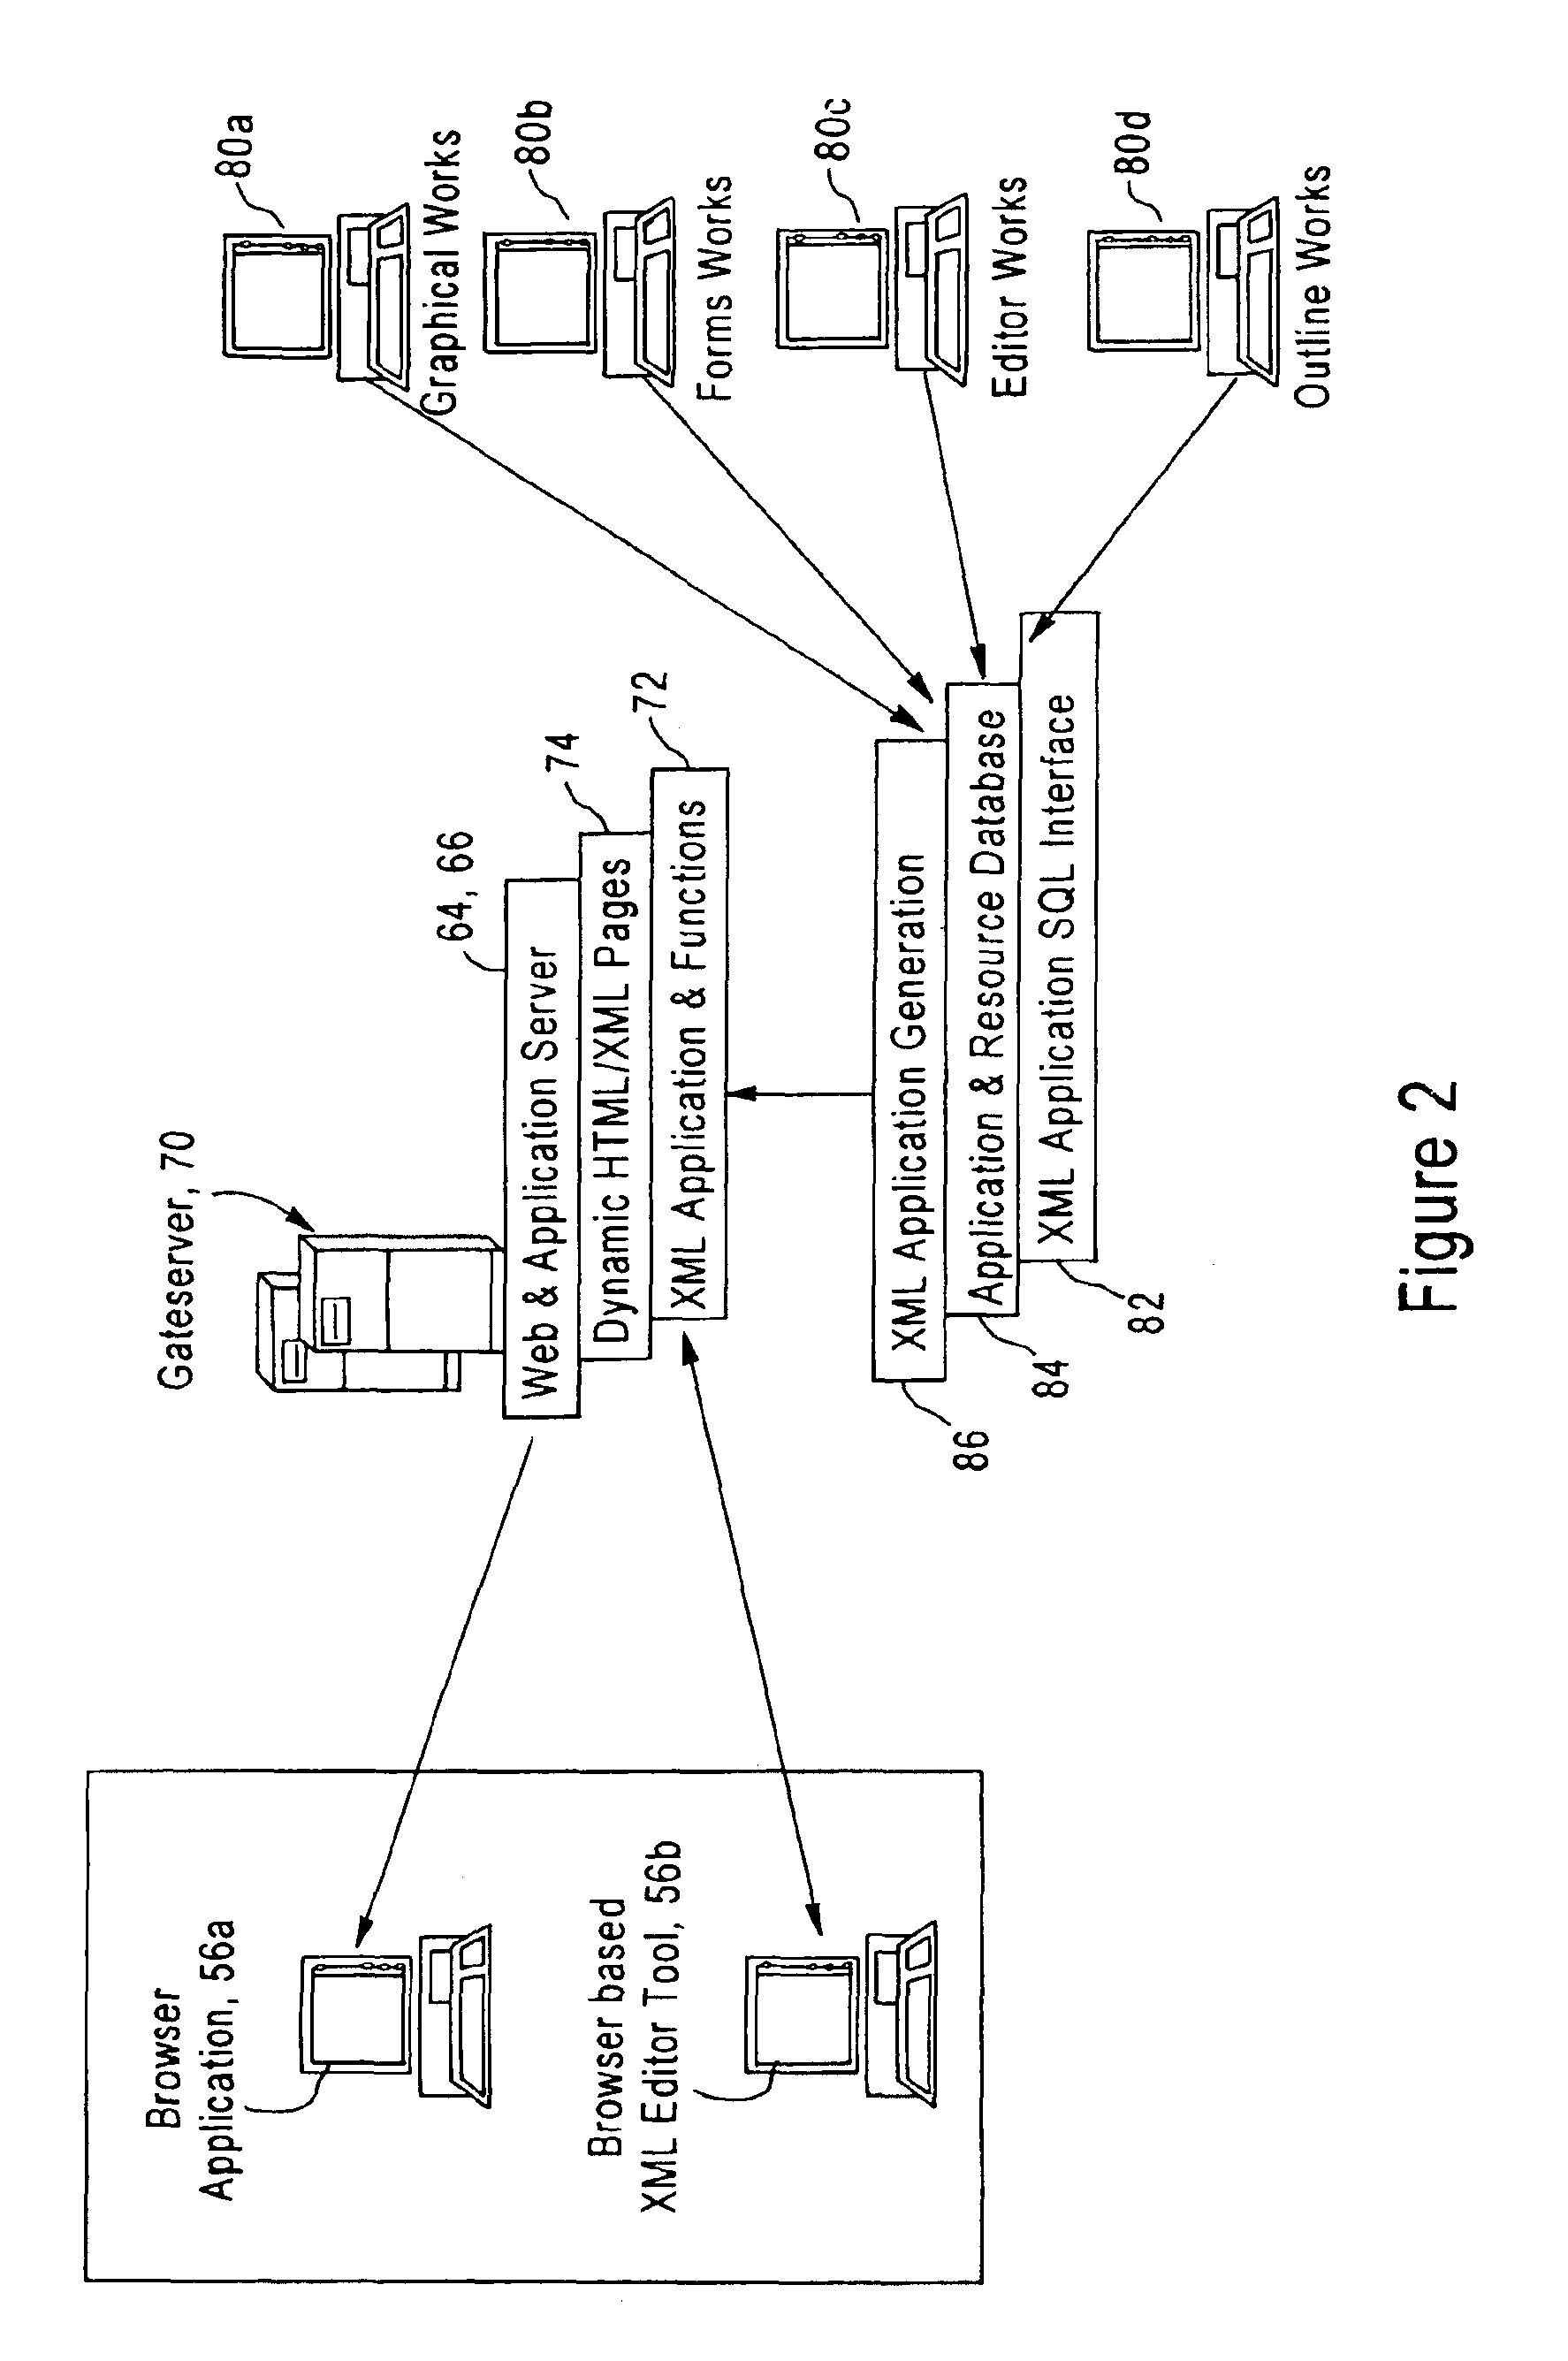 Application server providing personalized voice enabled web application services using extensible markup language documents